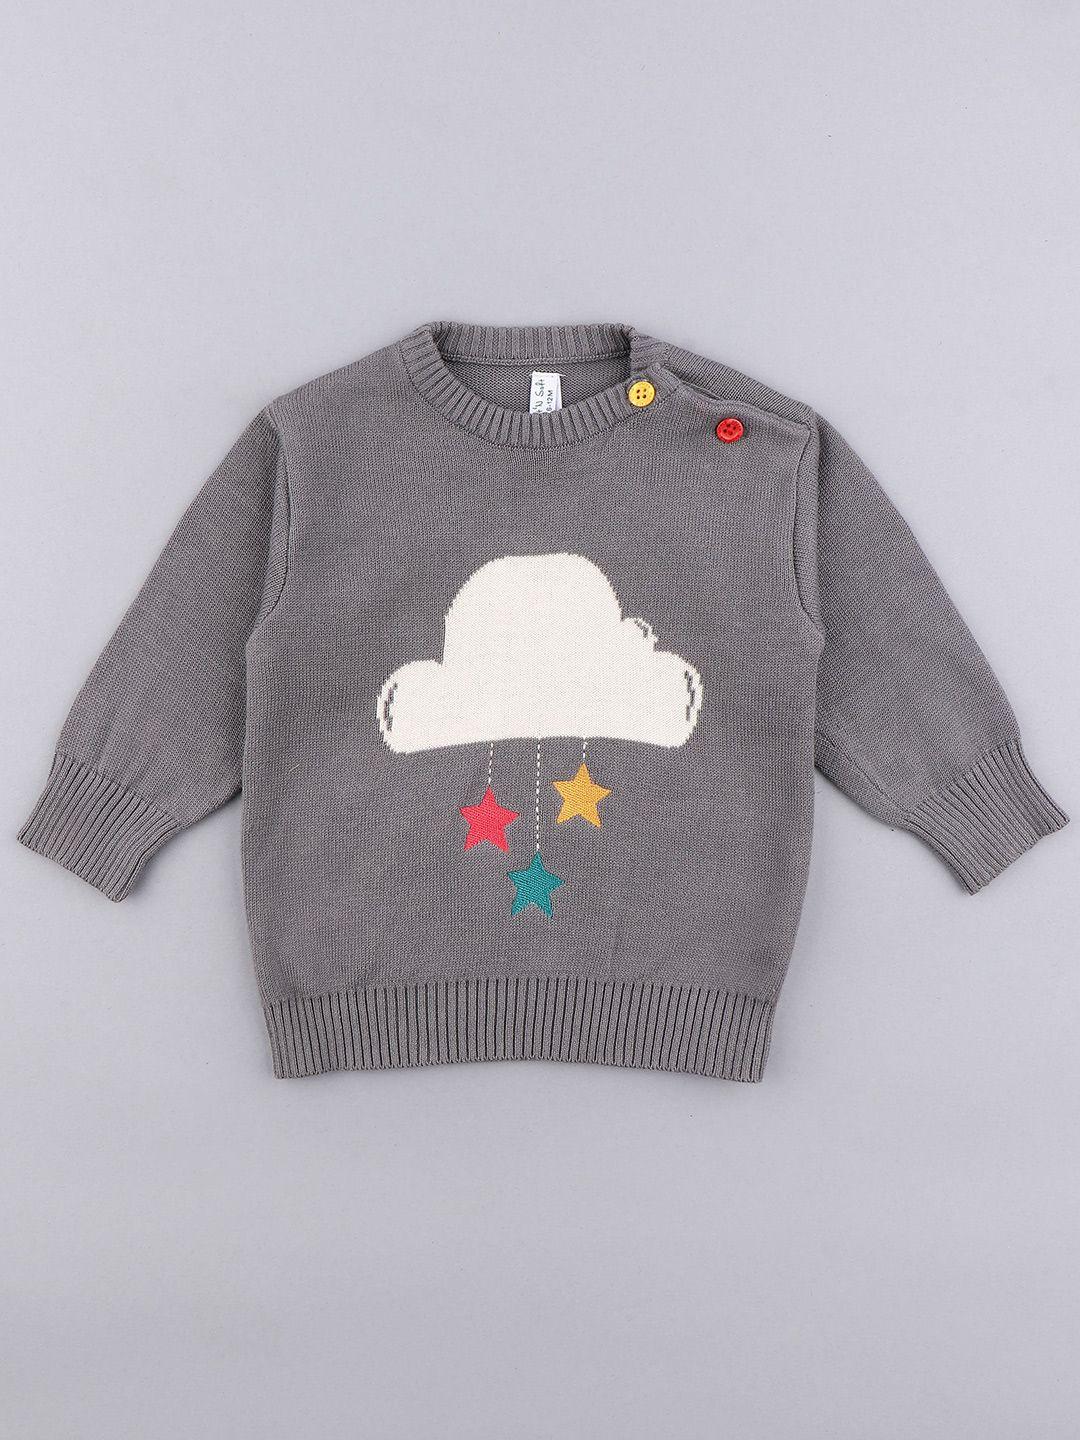 cot'n-soft-boys-graphic-printed-woollen-pullover-sweater